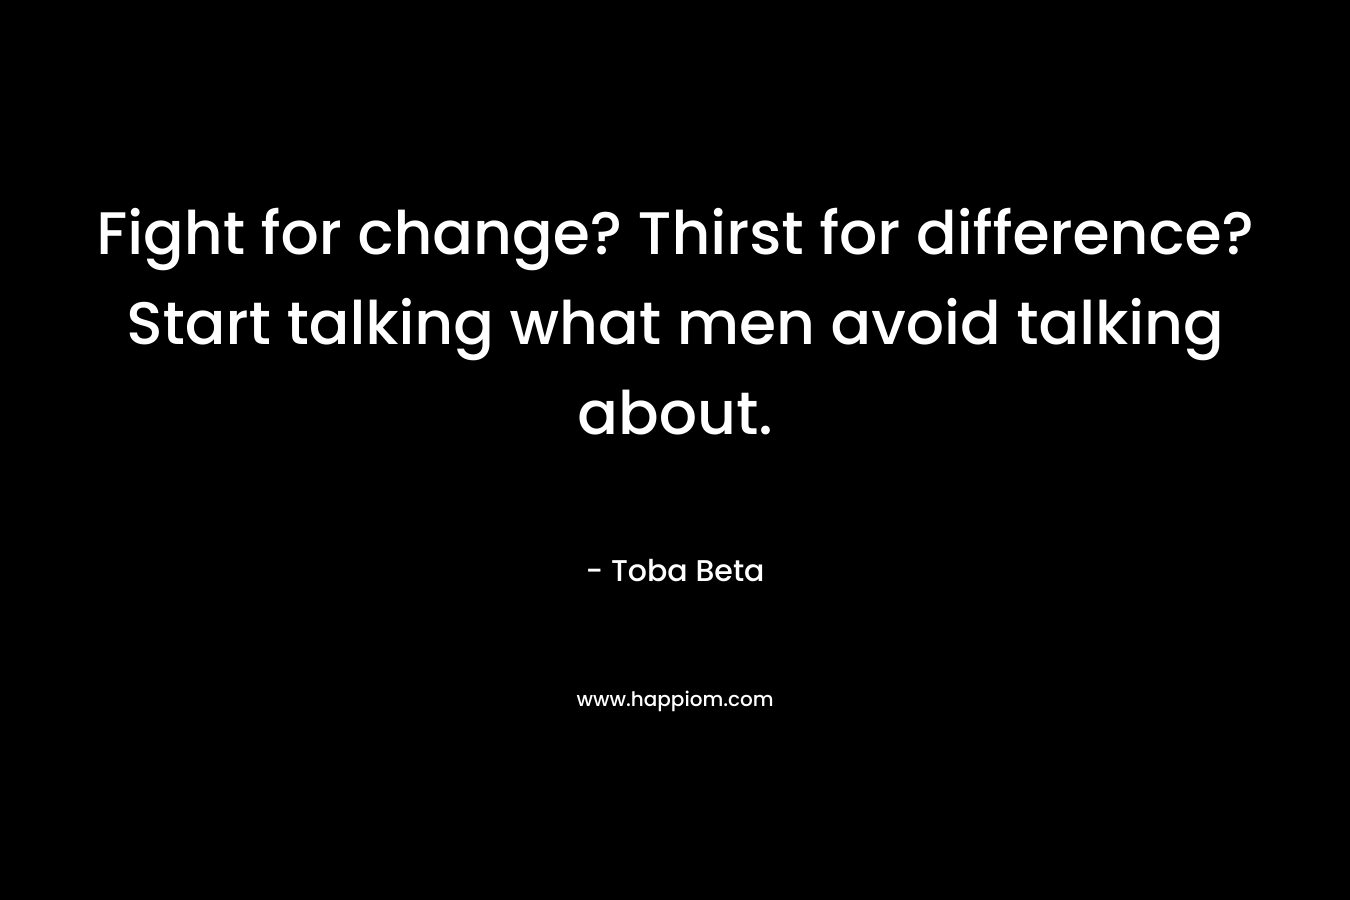 Fight for change? Thirst for difference?Start talking what men avoid talking about.